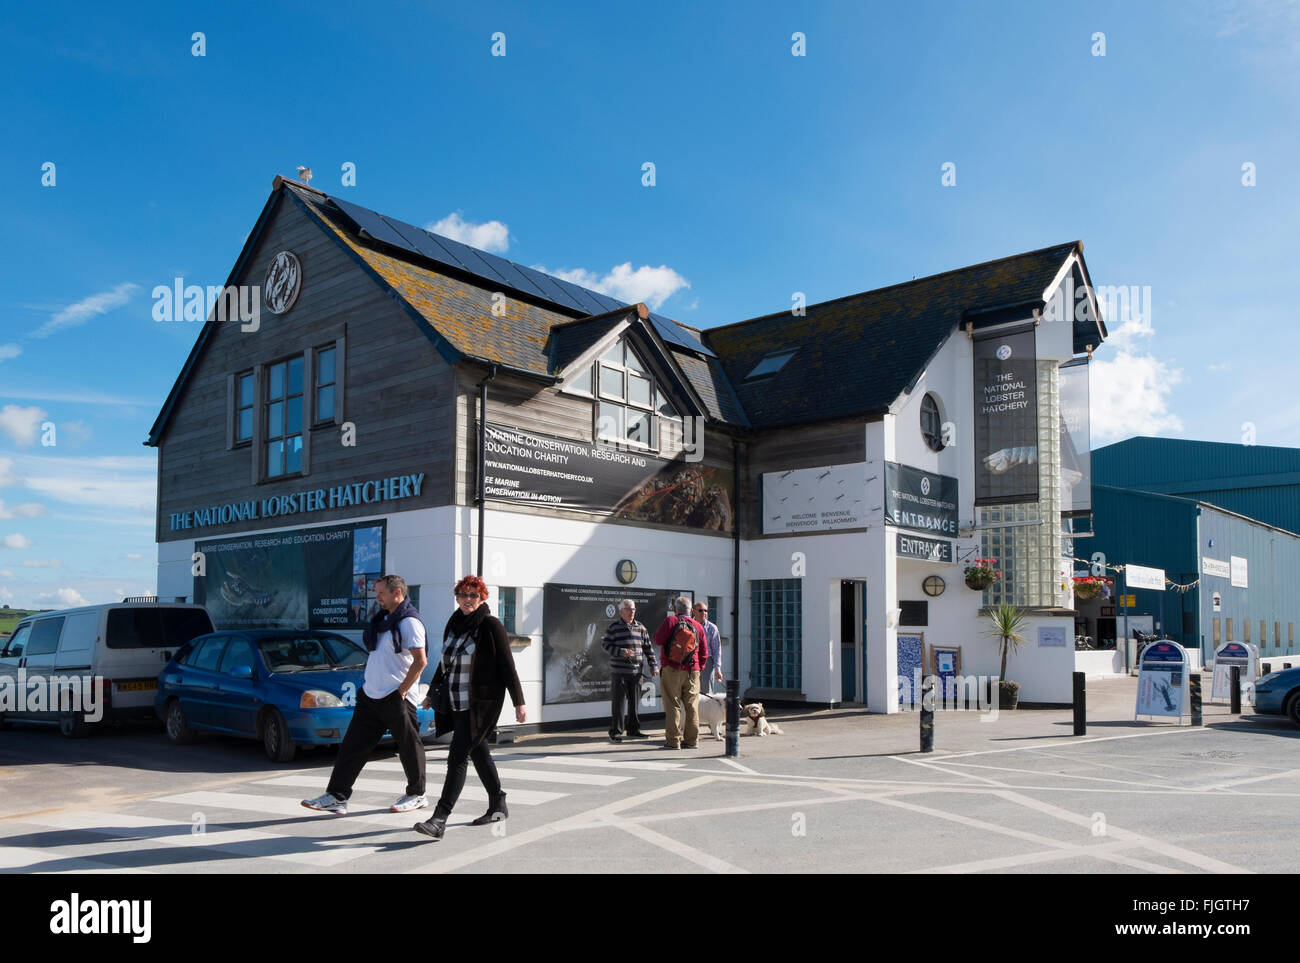 Il National Lobster Hatchery a Padstow, Cornwall, Regno Unito. Foto Stock